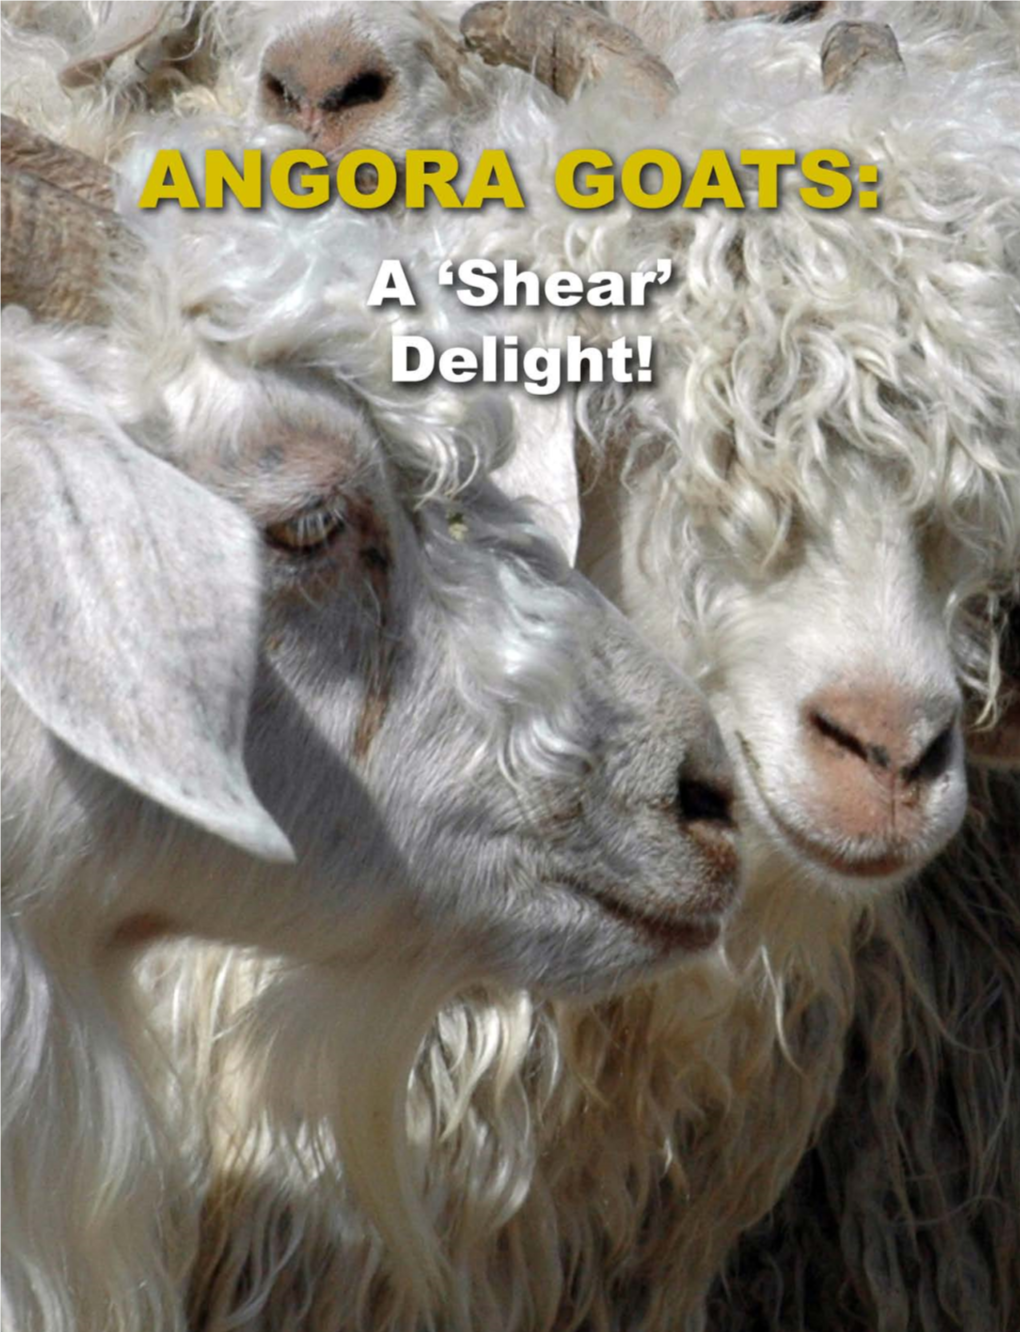 ANGORA GOATS: a ‘Shear’ Delight! Protect Your Angoras from the Elements